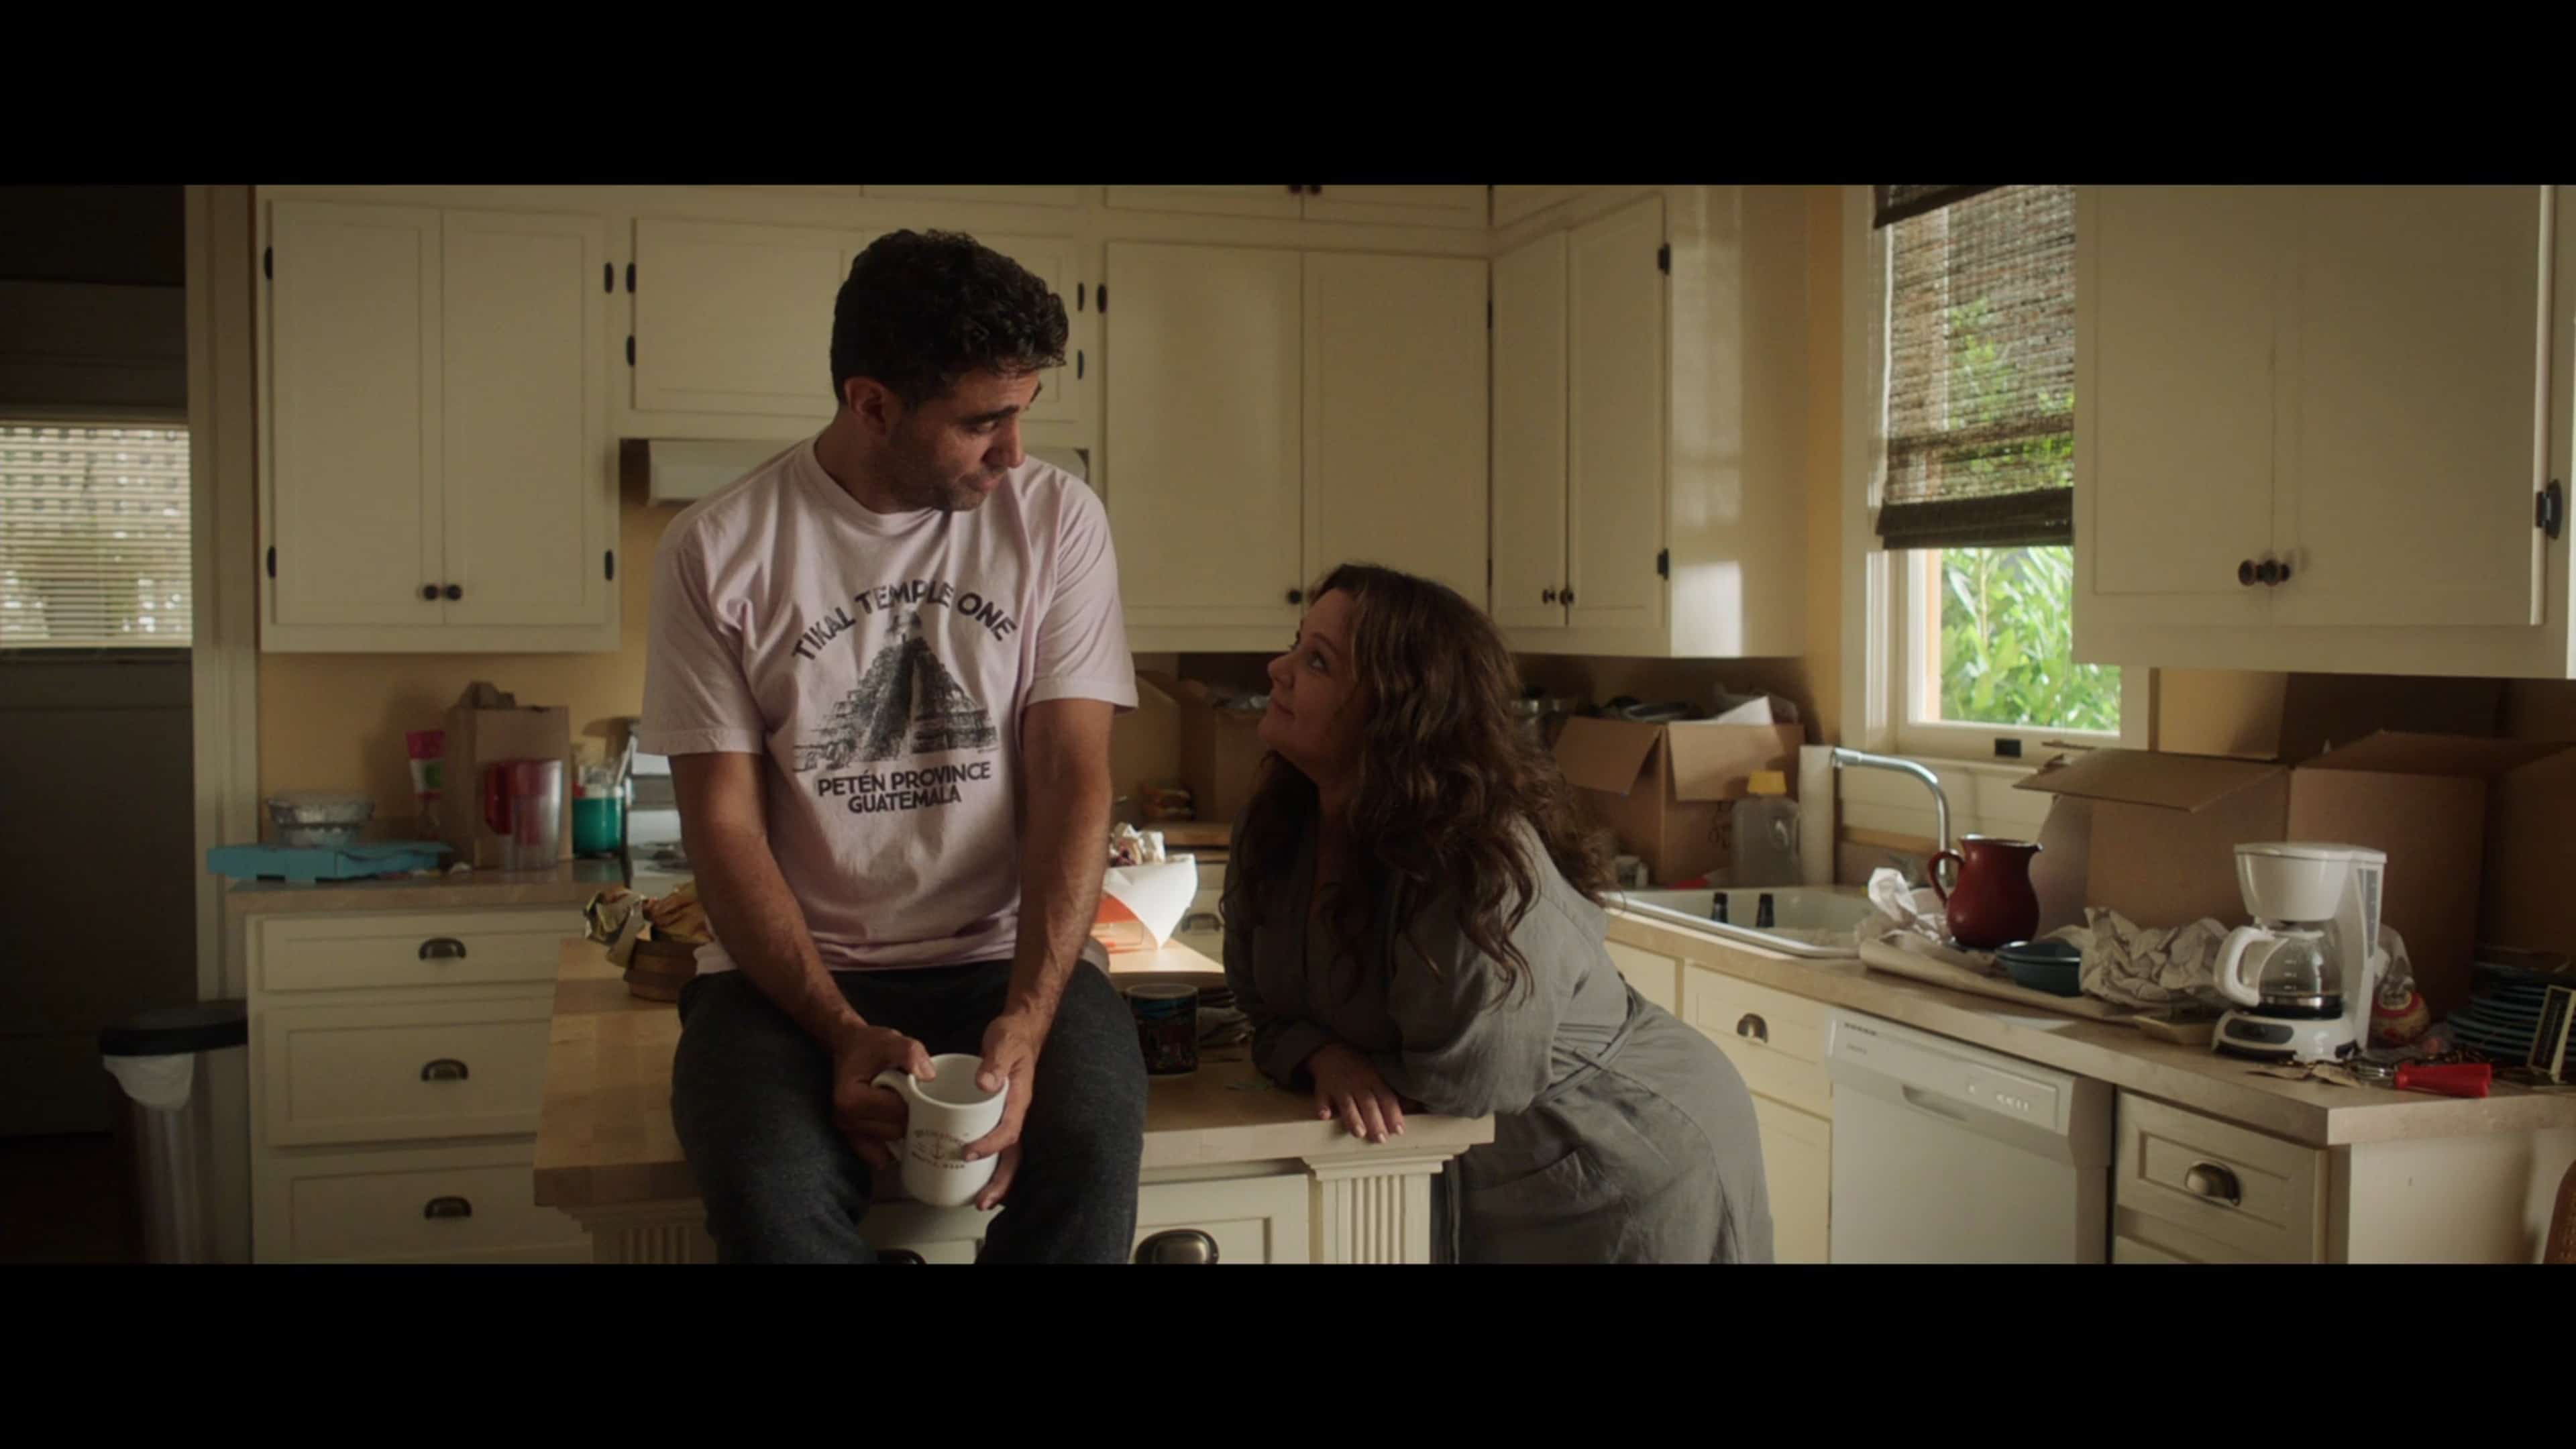 George (Bobby Cannavale) and Carol (Melissa McCarthy) in George's kitchen.